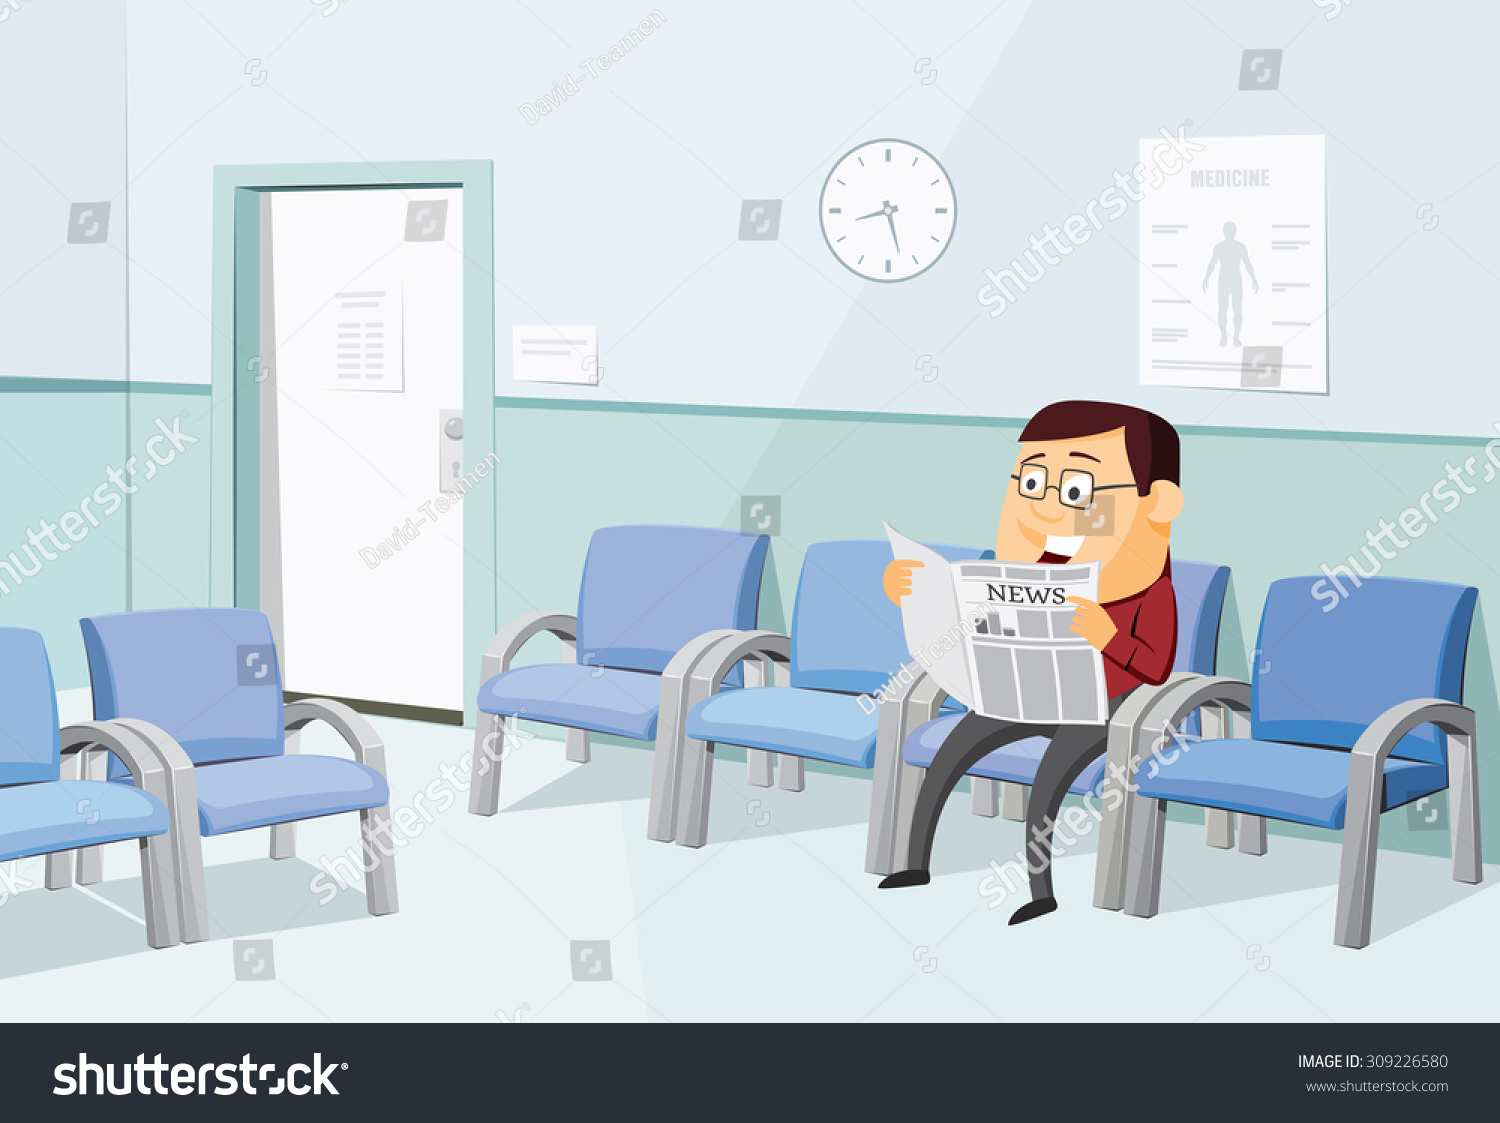 clipart waiting room - photo #7